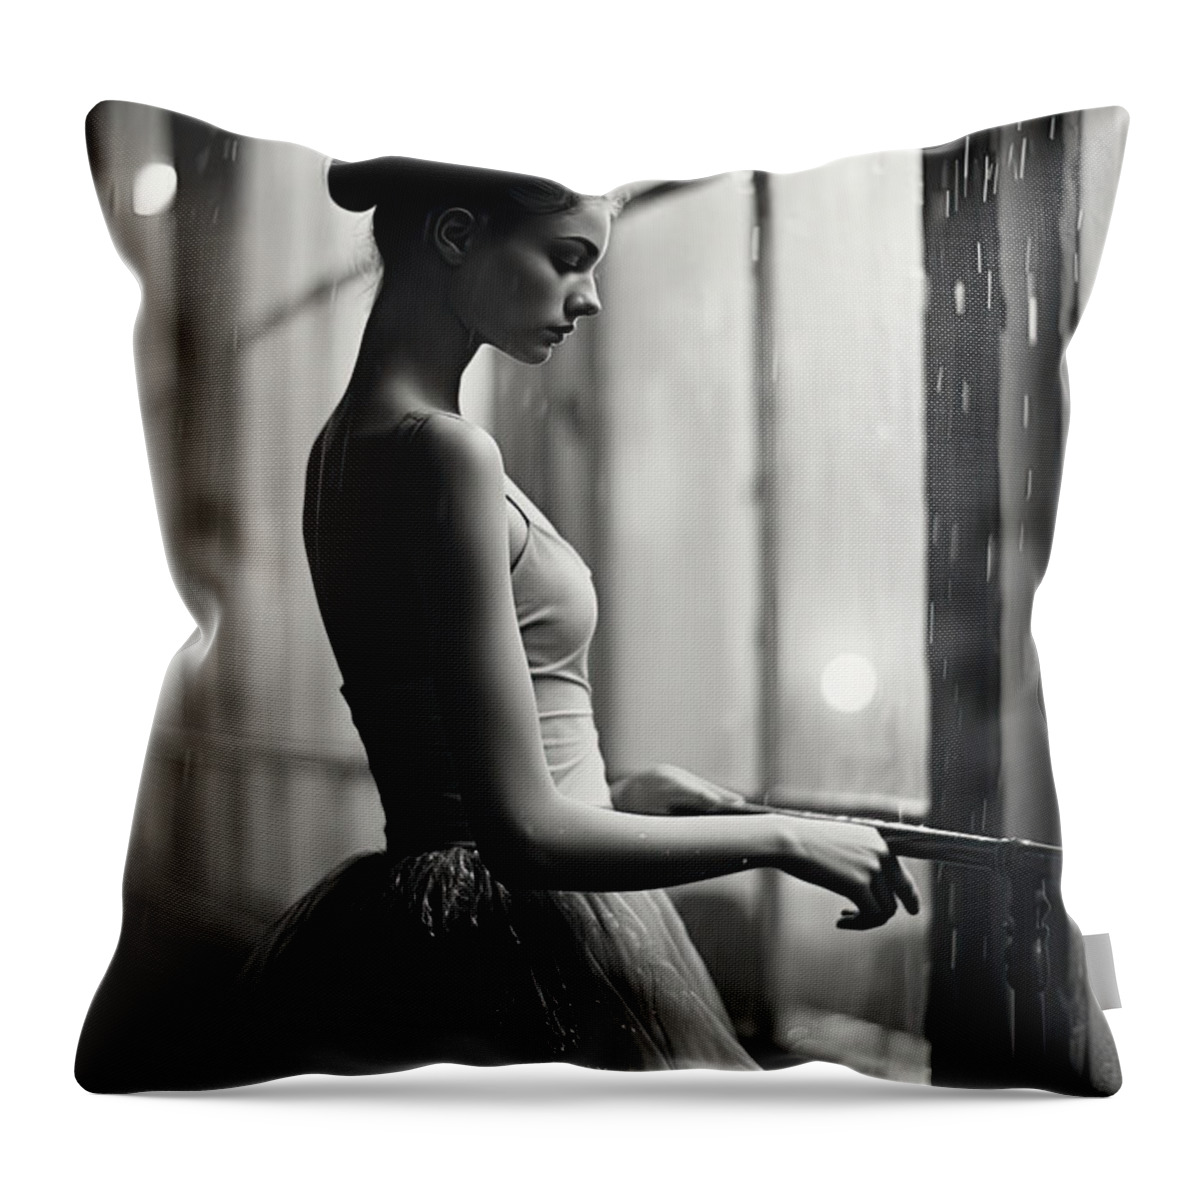 Disillusionment Throw Pillow featuring the photograph Disillusionment by My Head Cinema